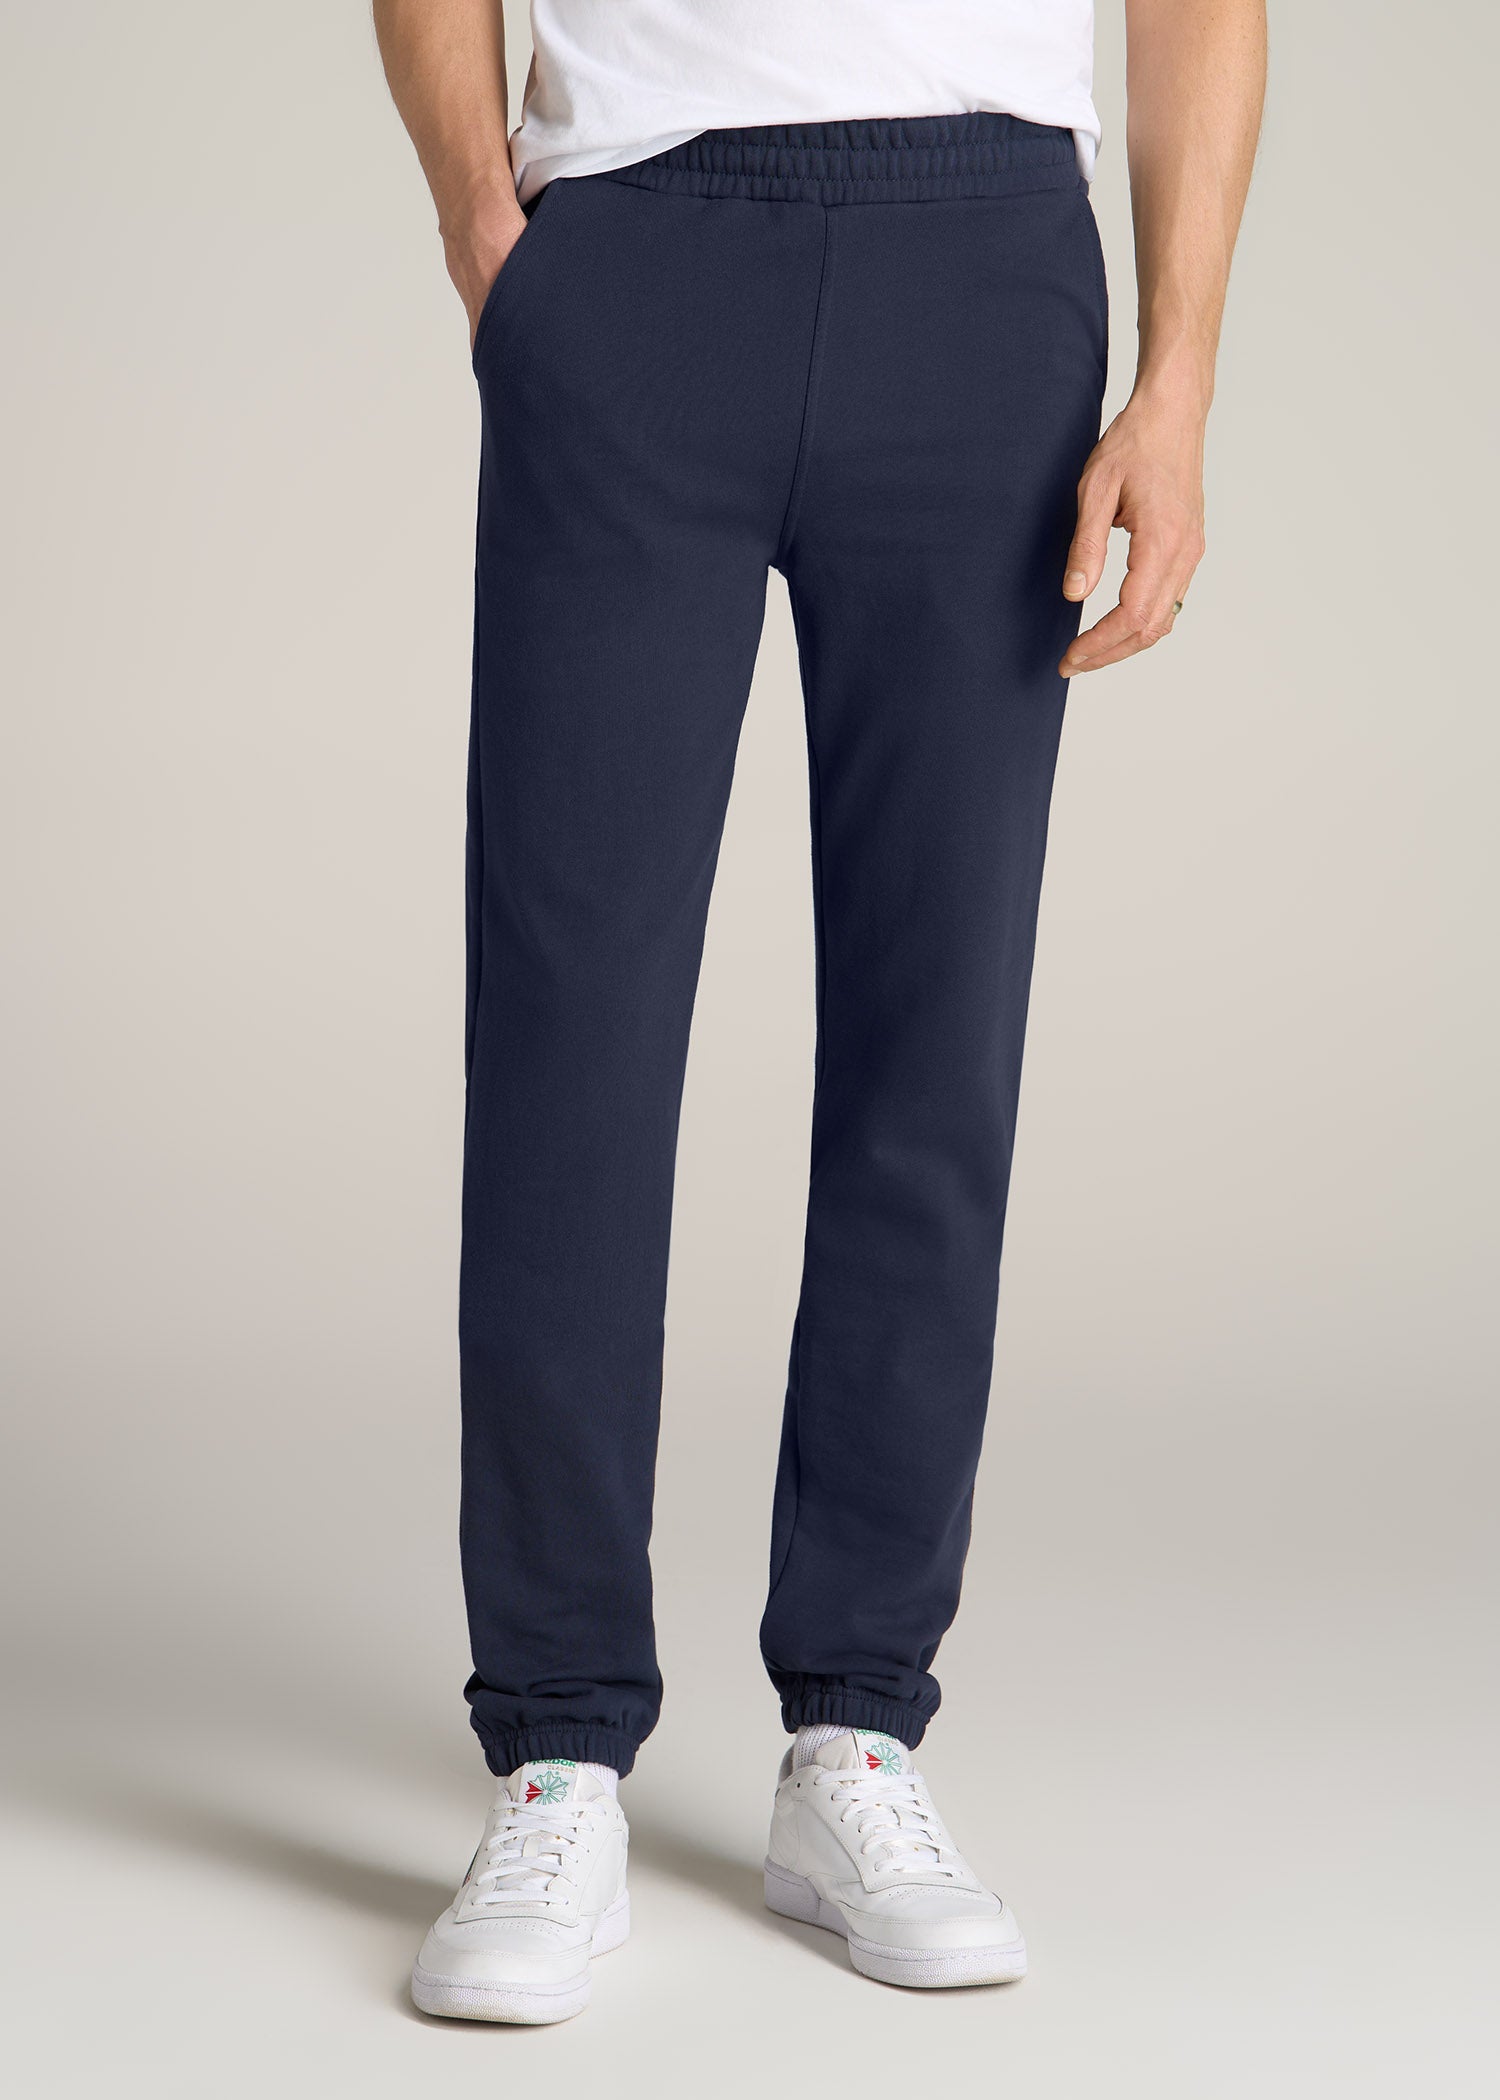 10 Old Navy Work Pants That Look Like Trousers and Feel Like Sweats